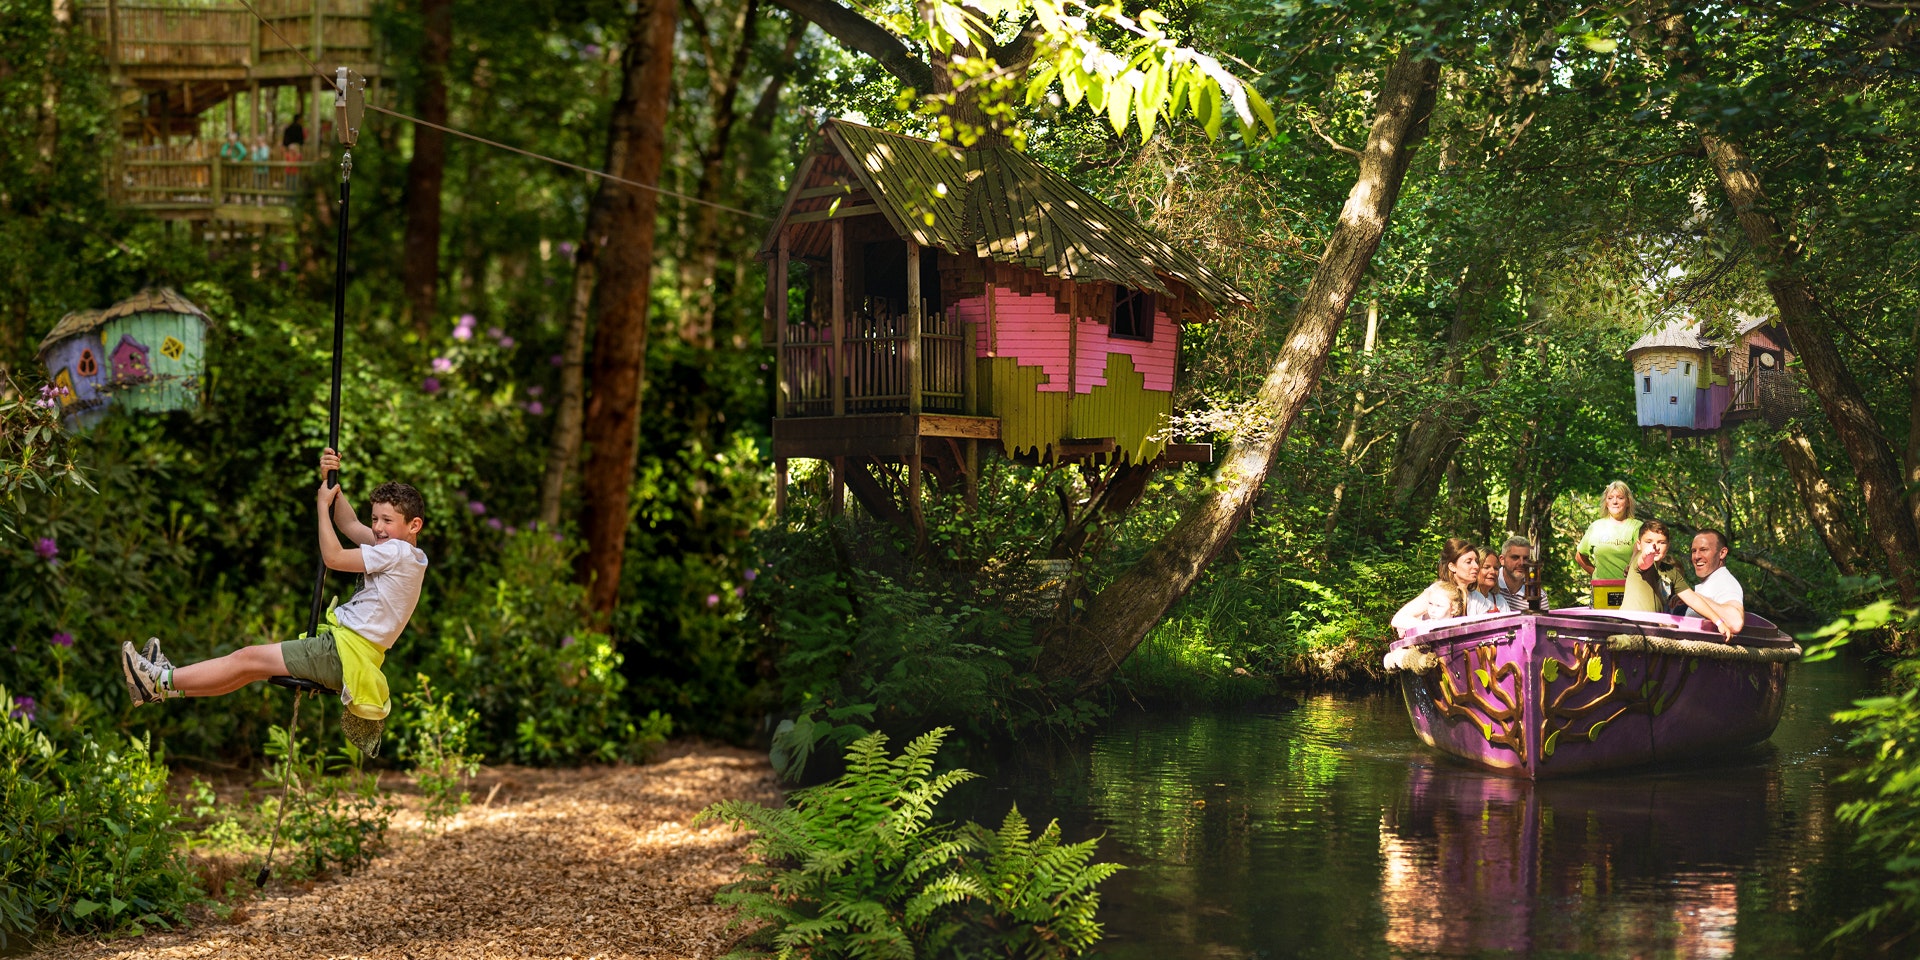 Zip wires, treehouses, structures and boat rides in the woods of BeWILDerwood